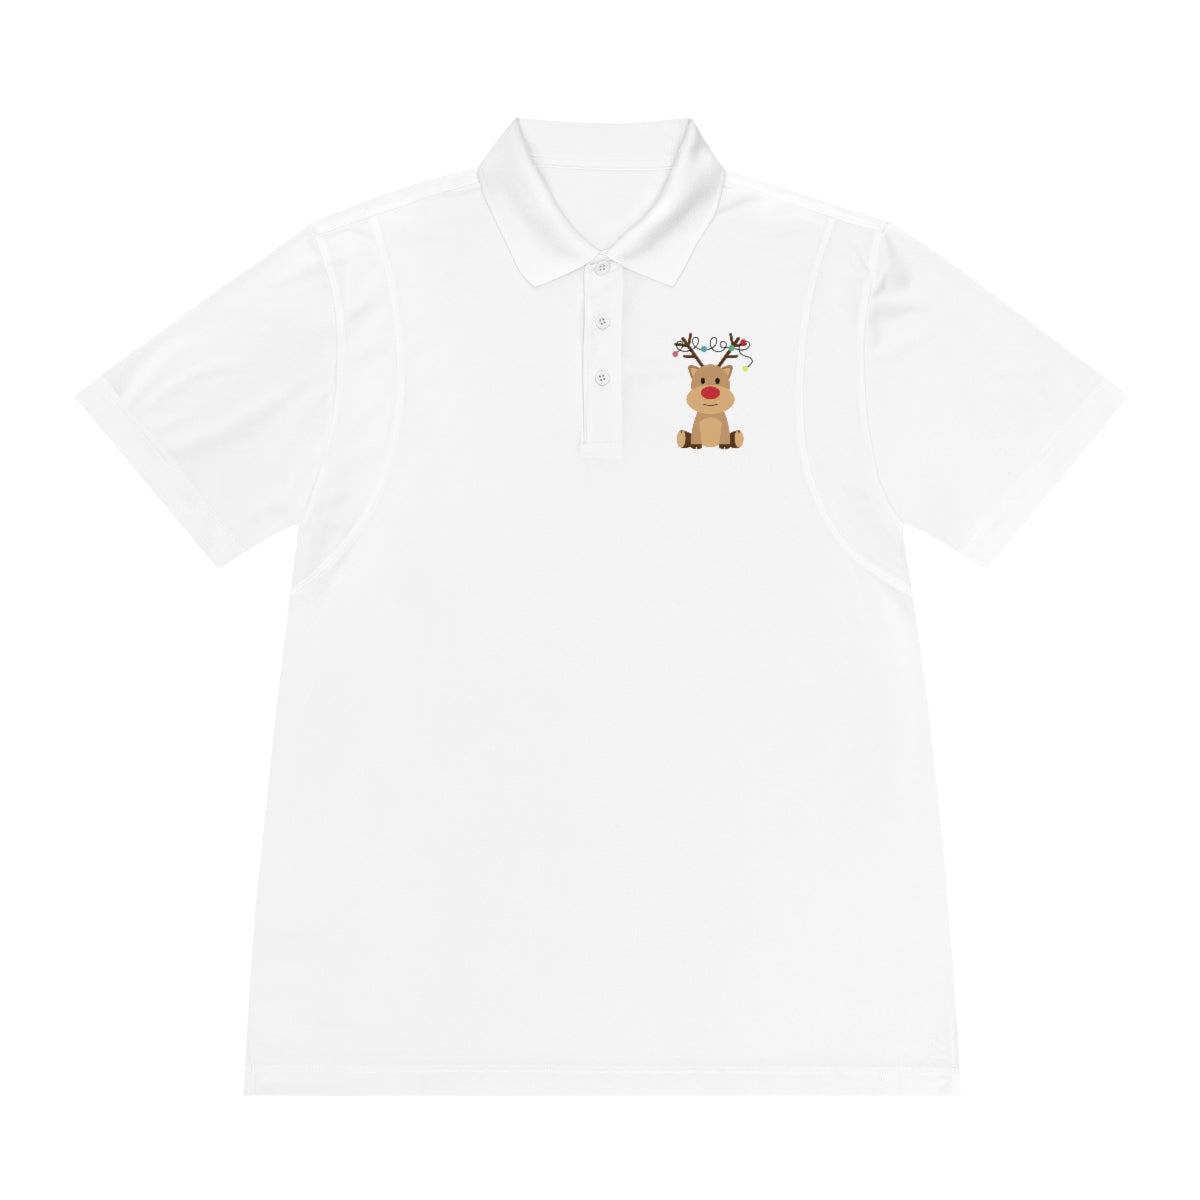 Rudolph the Red Nose Reindeer Men's Sport Polo Shirt